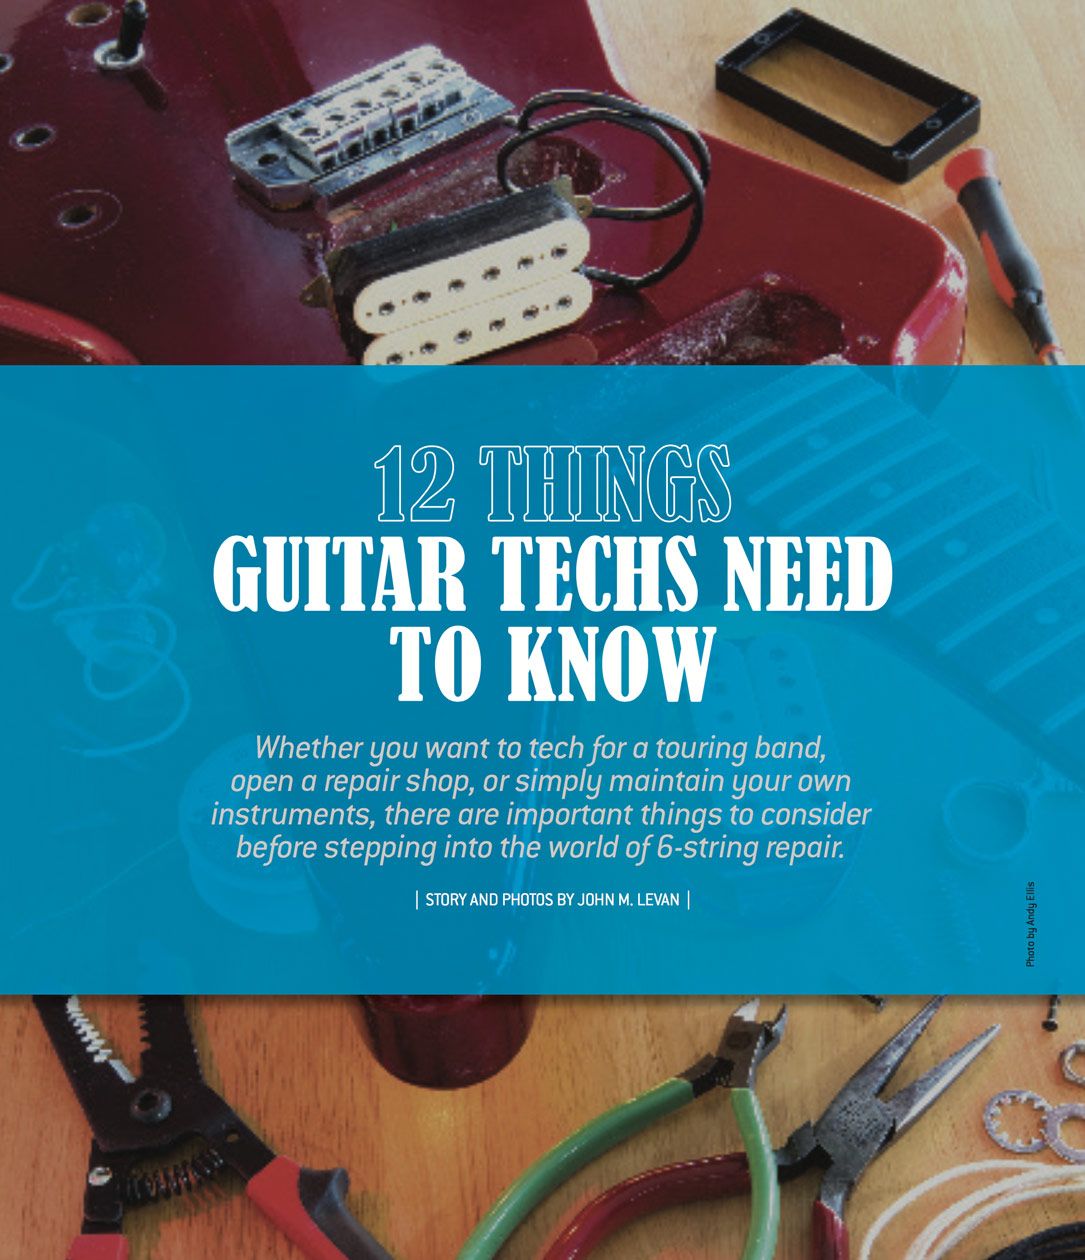 12 Things Guitar Techs Need to Know